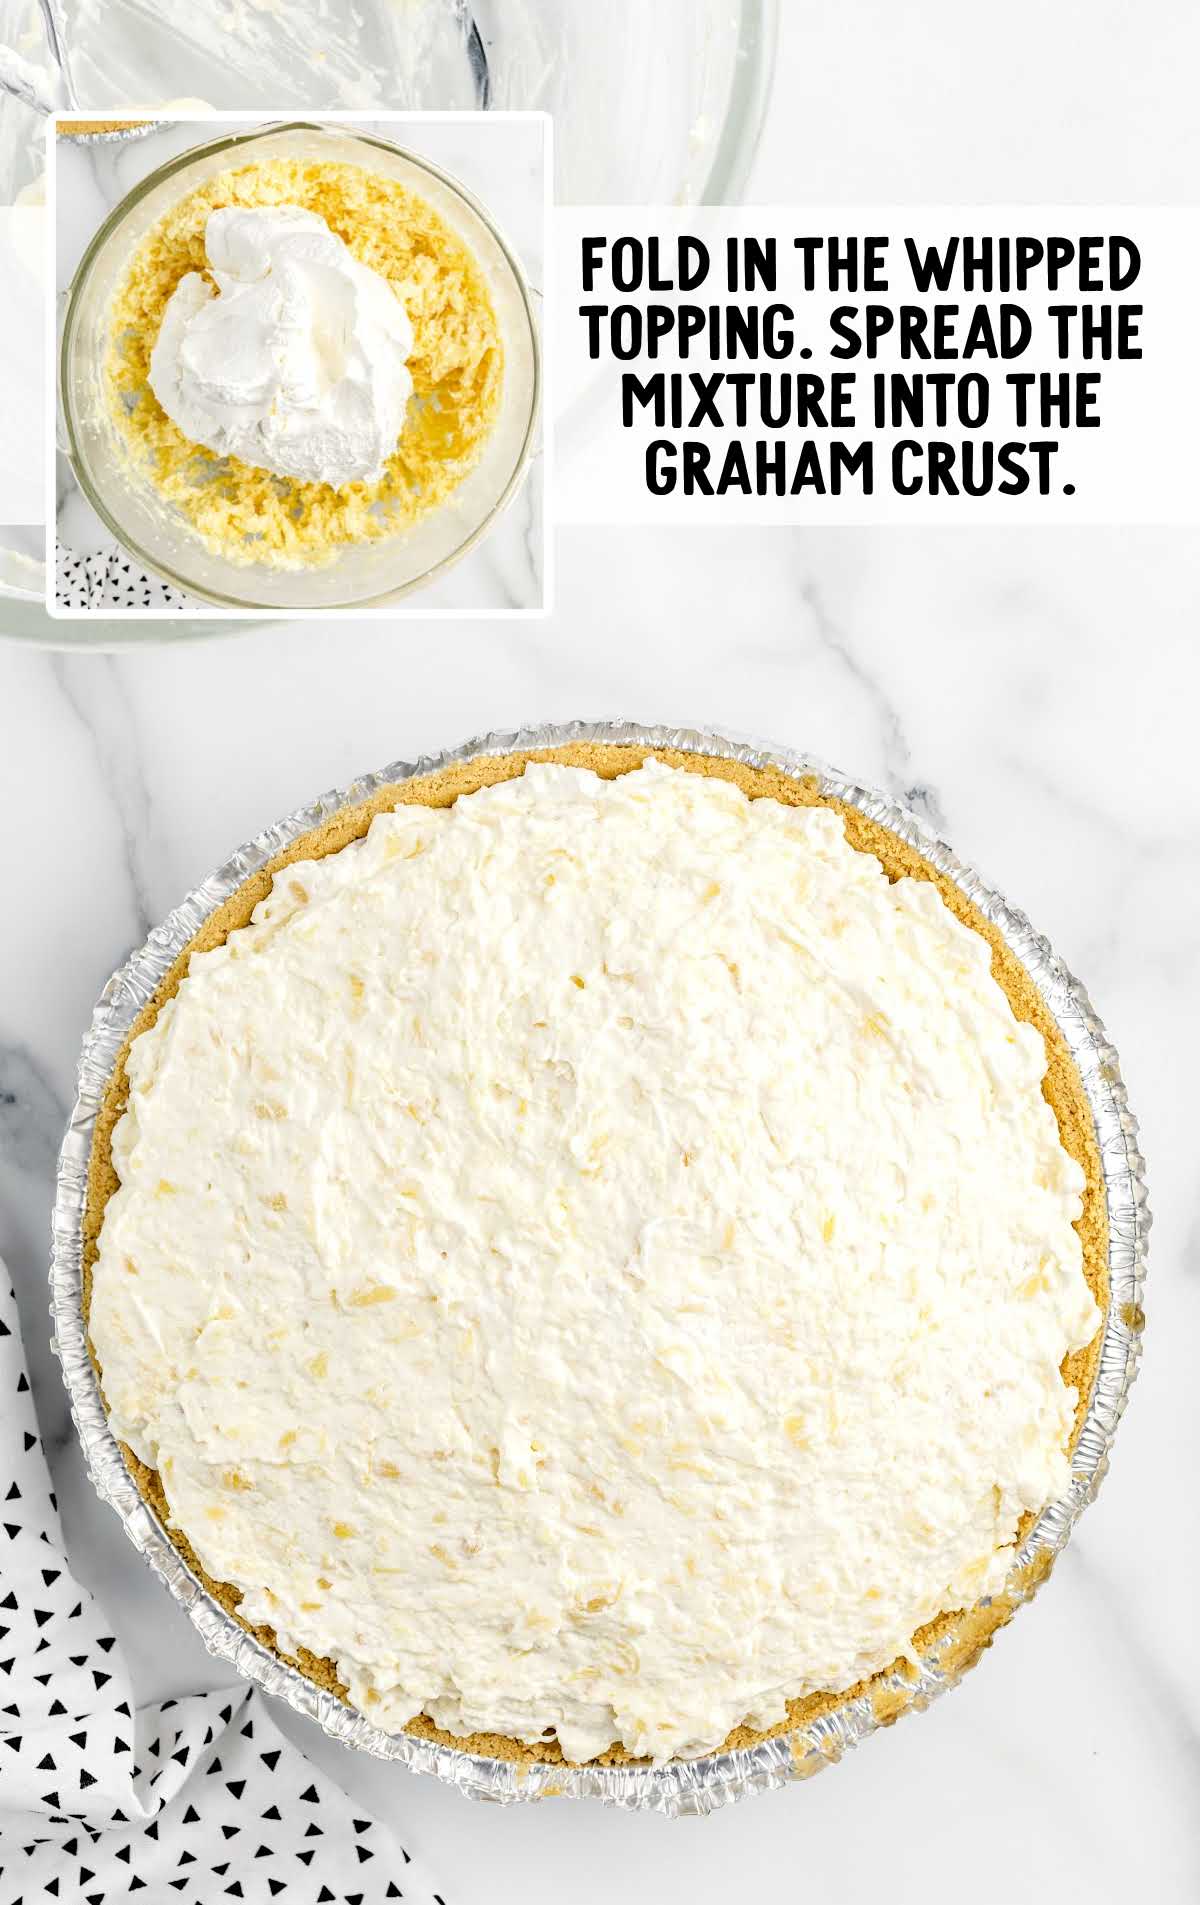 whipped cream folded into the pineapple mixture and placed into the graham cracker crust